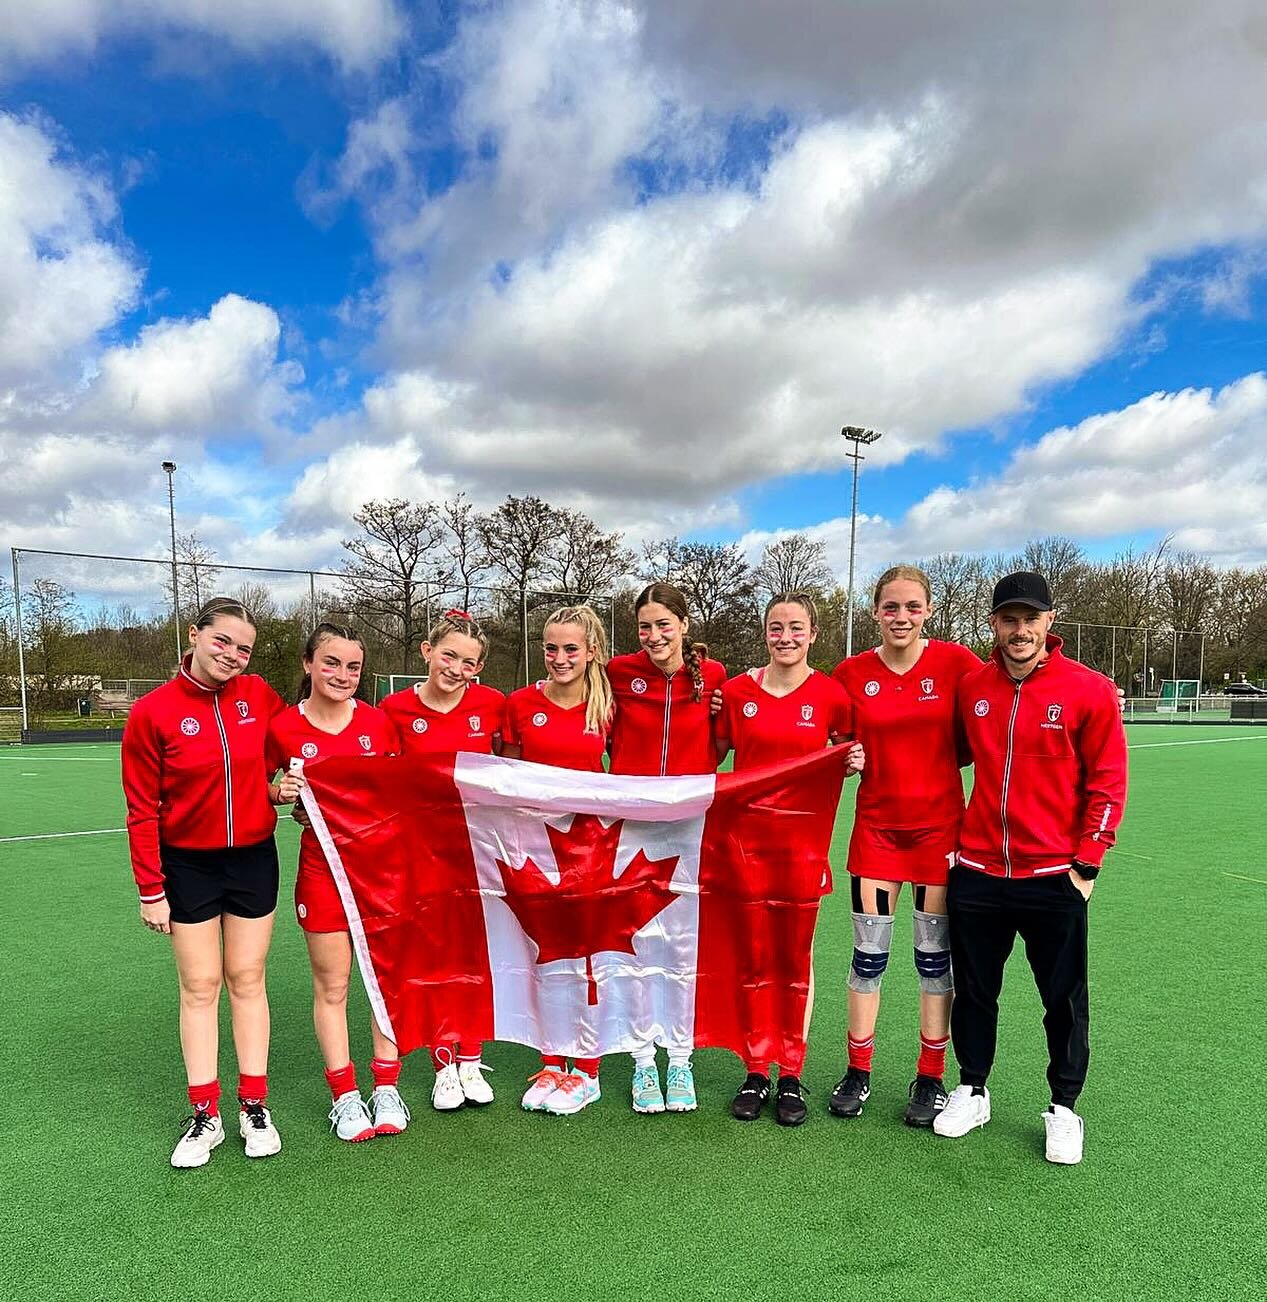 🏑🇨🇦 Shoutout to our incredible Sea to Sky FHC athletes and head coach, representing Field Hockey Canada on their U17 tour in the Netherlands! 🎉👏 We couldn&rsquo;t be prouder of their hard work and dedication. Wishing all the girls and @kyle_mark